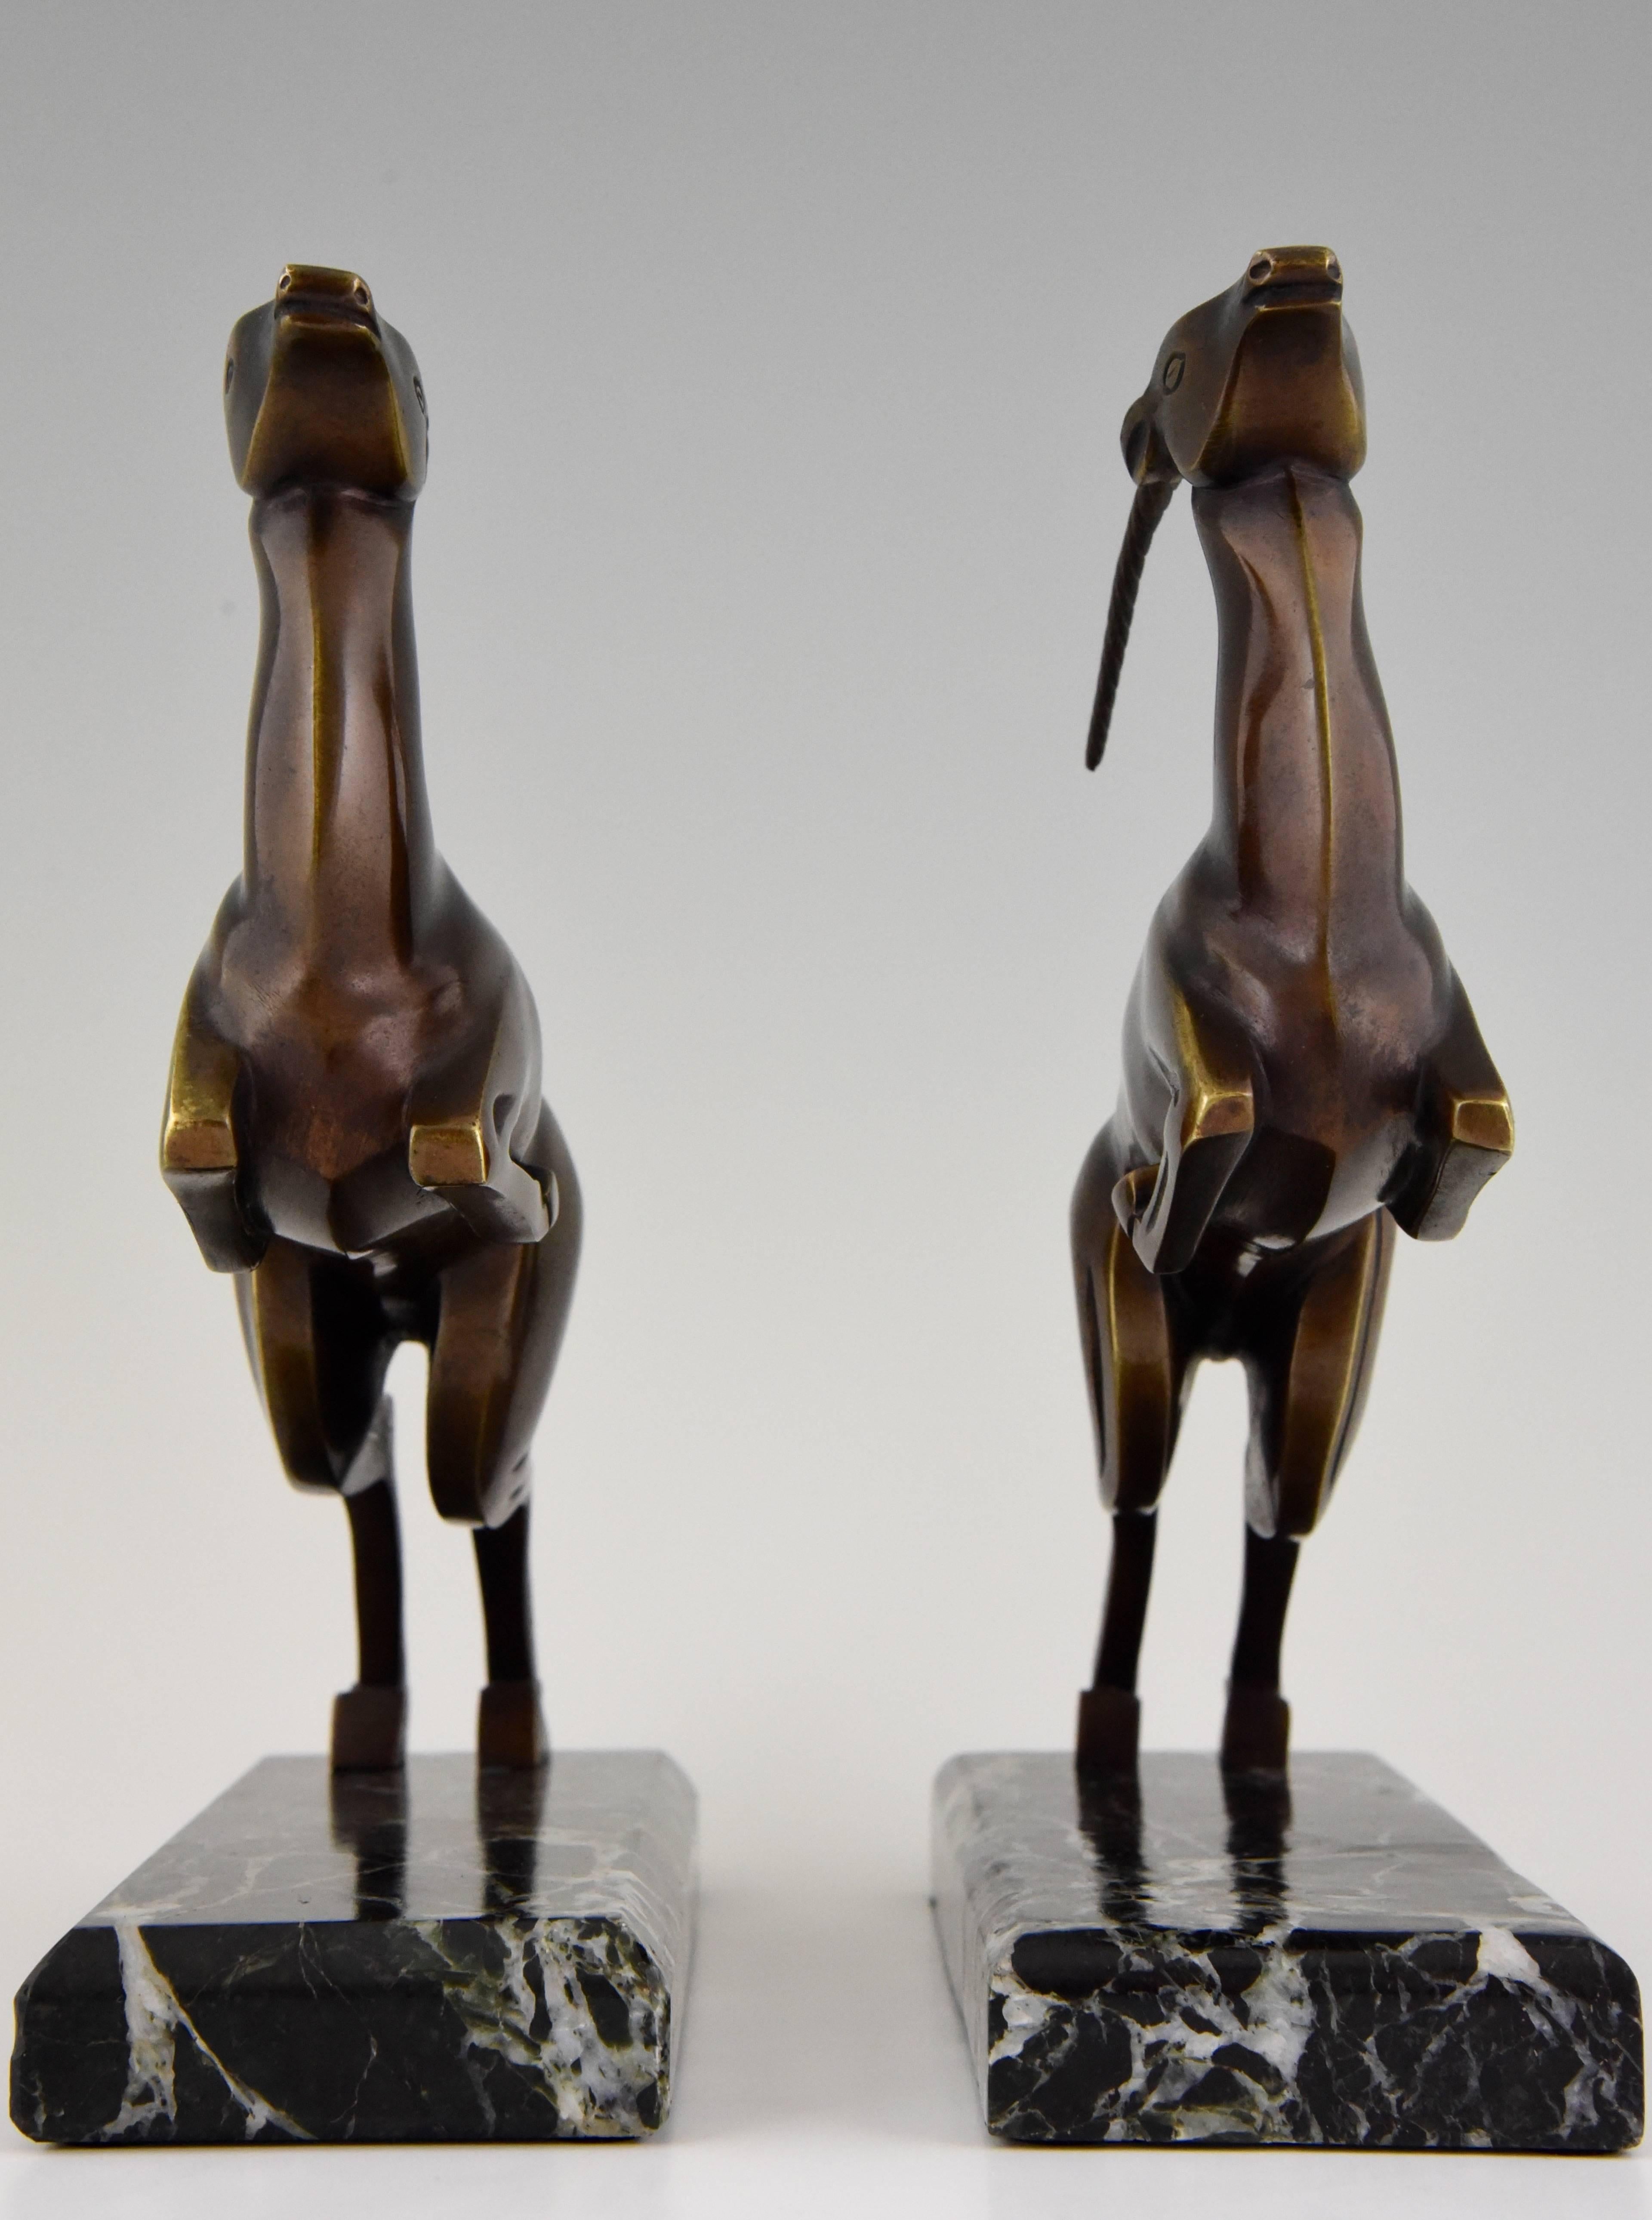 French Art Deco Bronze Leaping Gazelle Bookends by Marcel Andre Bouraine, 1930 France